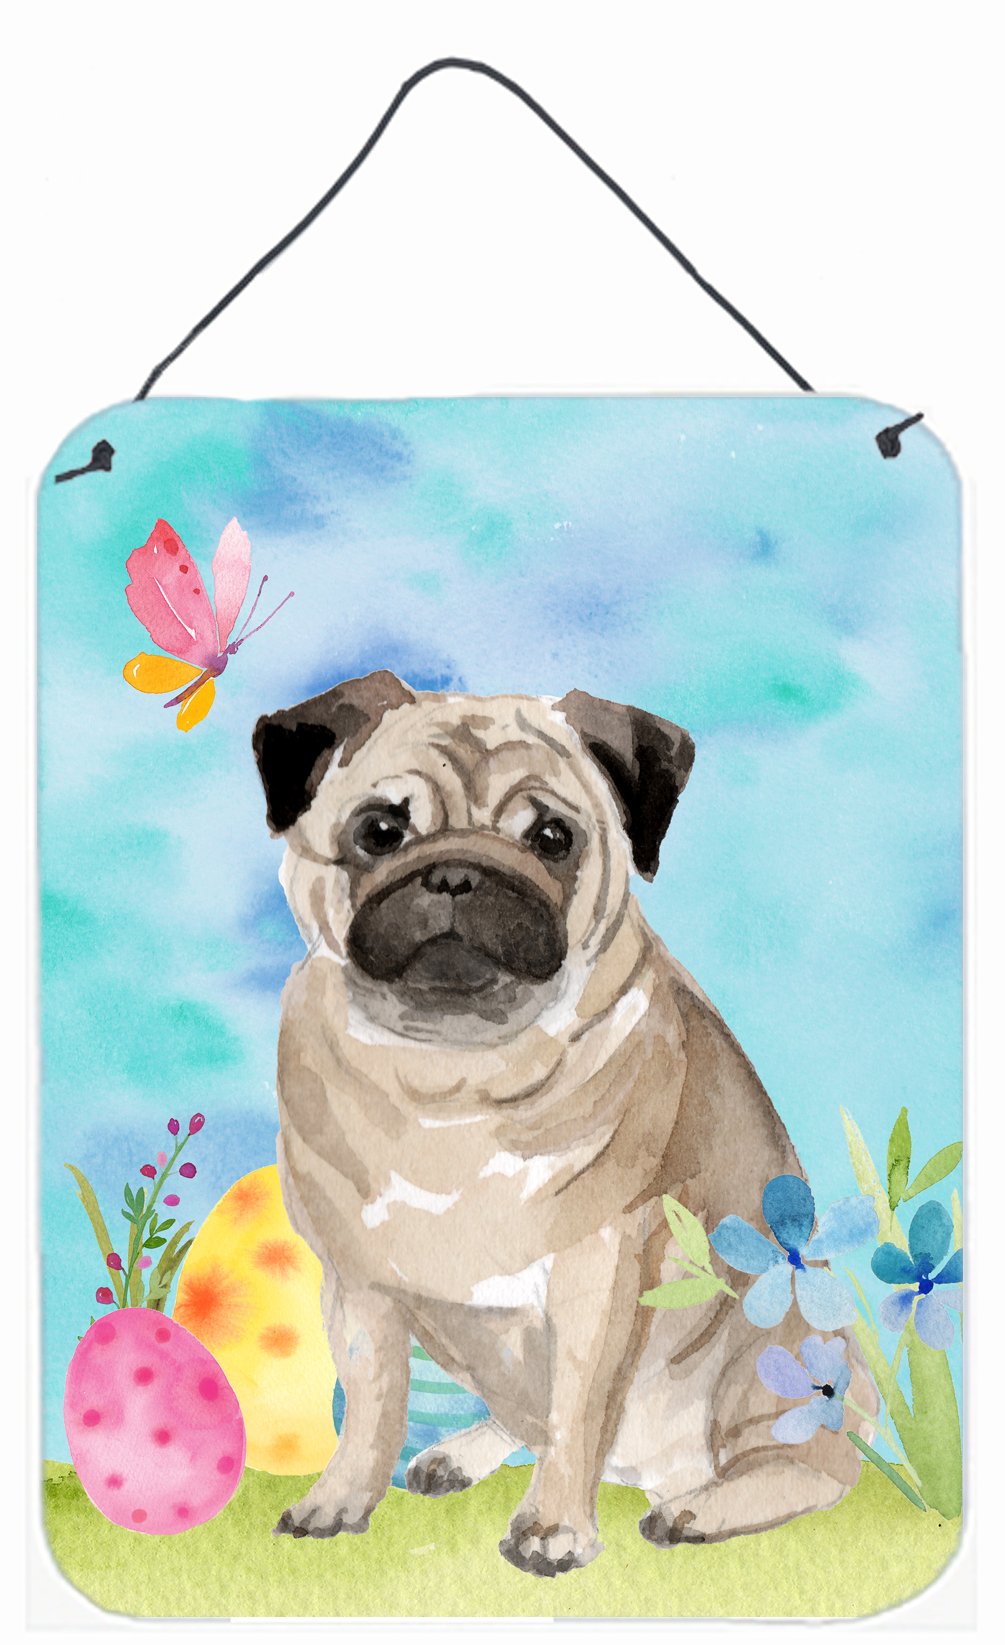 Fawn Pug Easter Wall or Door Hanging Prints BB9635DS1216 by Caroline's Treasures